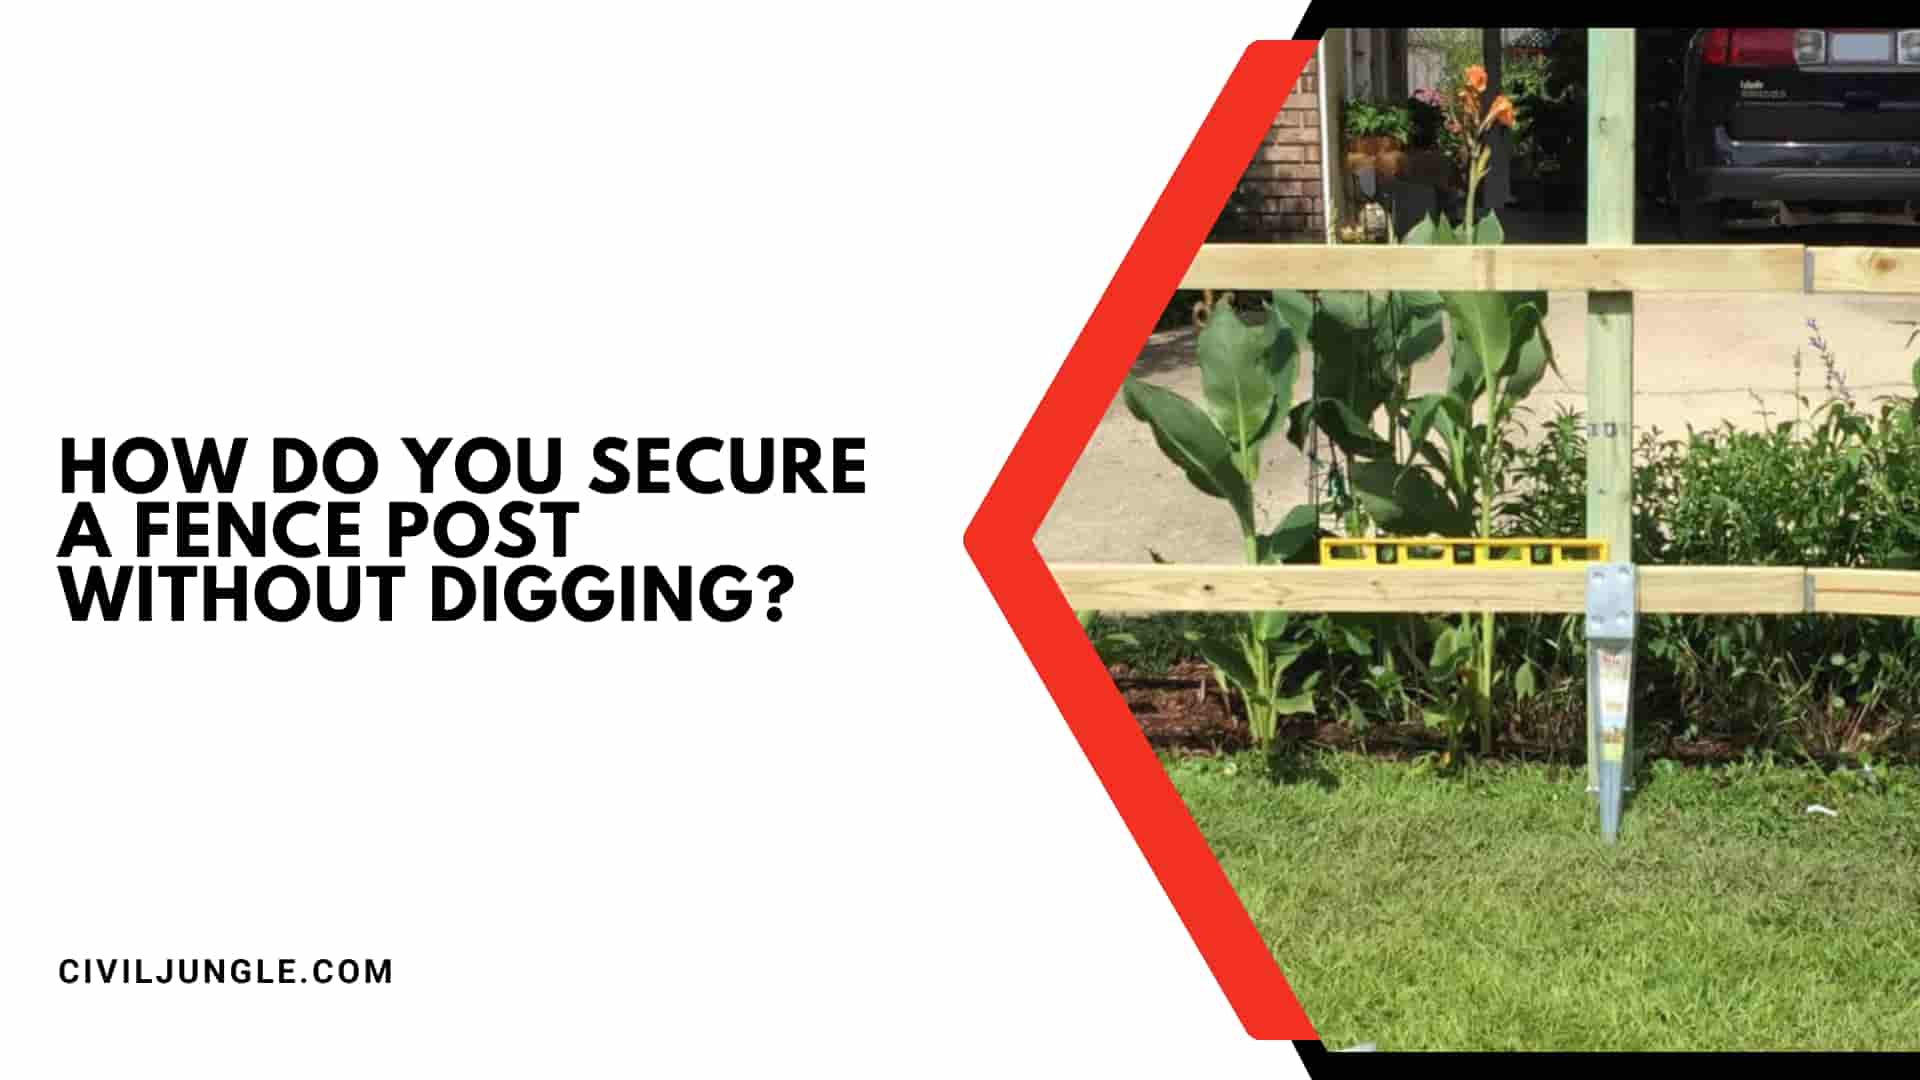 How Do You Secure a Fence Post Without Digging?